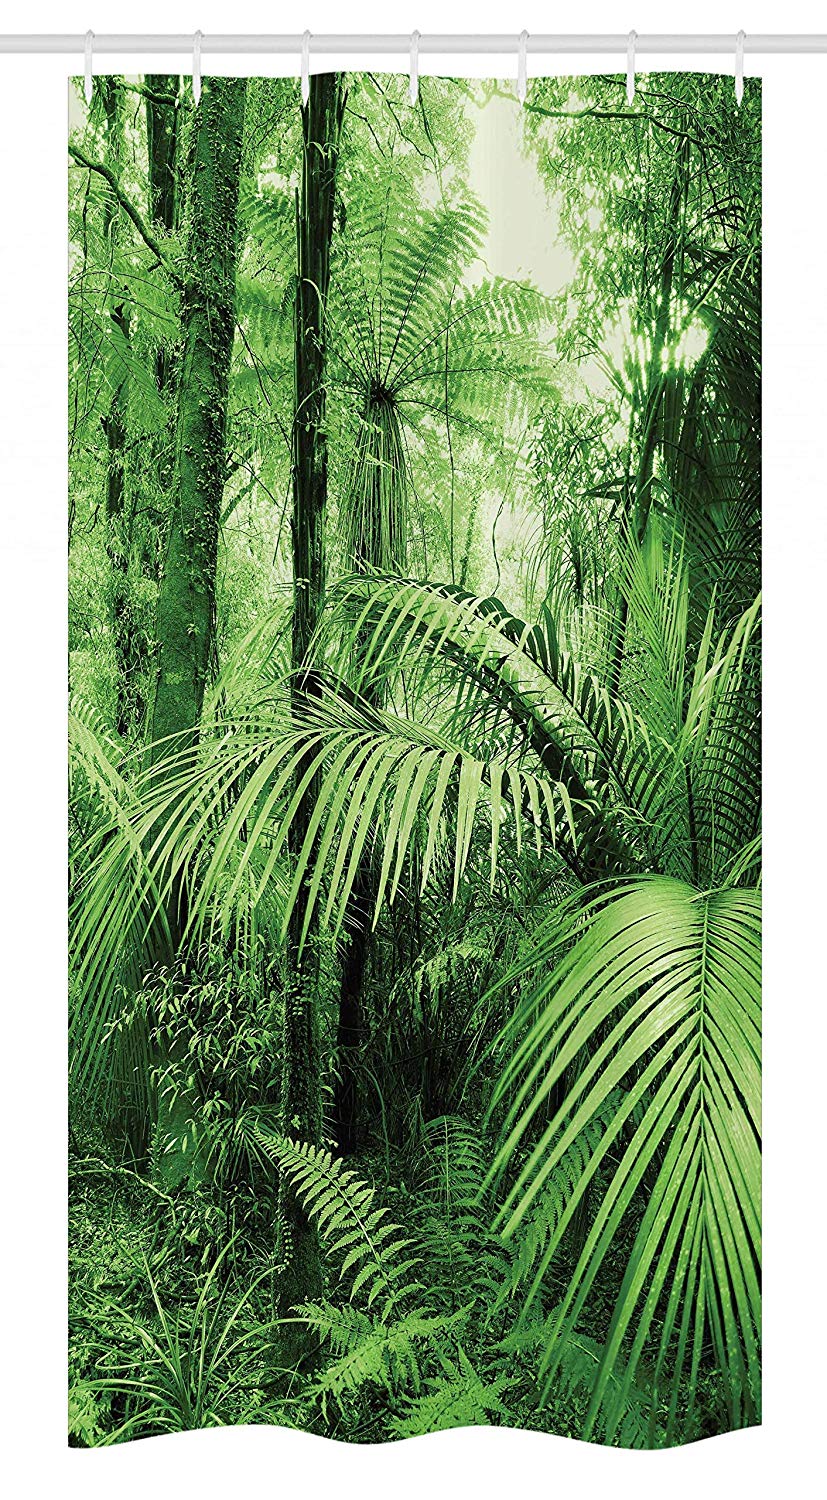 Ambesonne Rainforest Stall Shower Curtain, Palm Trees and Exotic Plants in Tropical Jungle Wild Nature Theme Illustration, Fabric Bathroom Decor Set with Hooks, 36